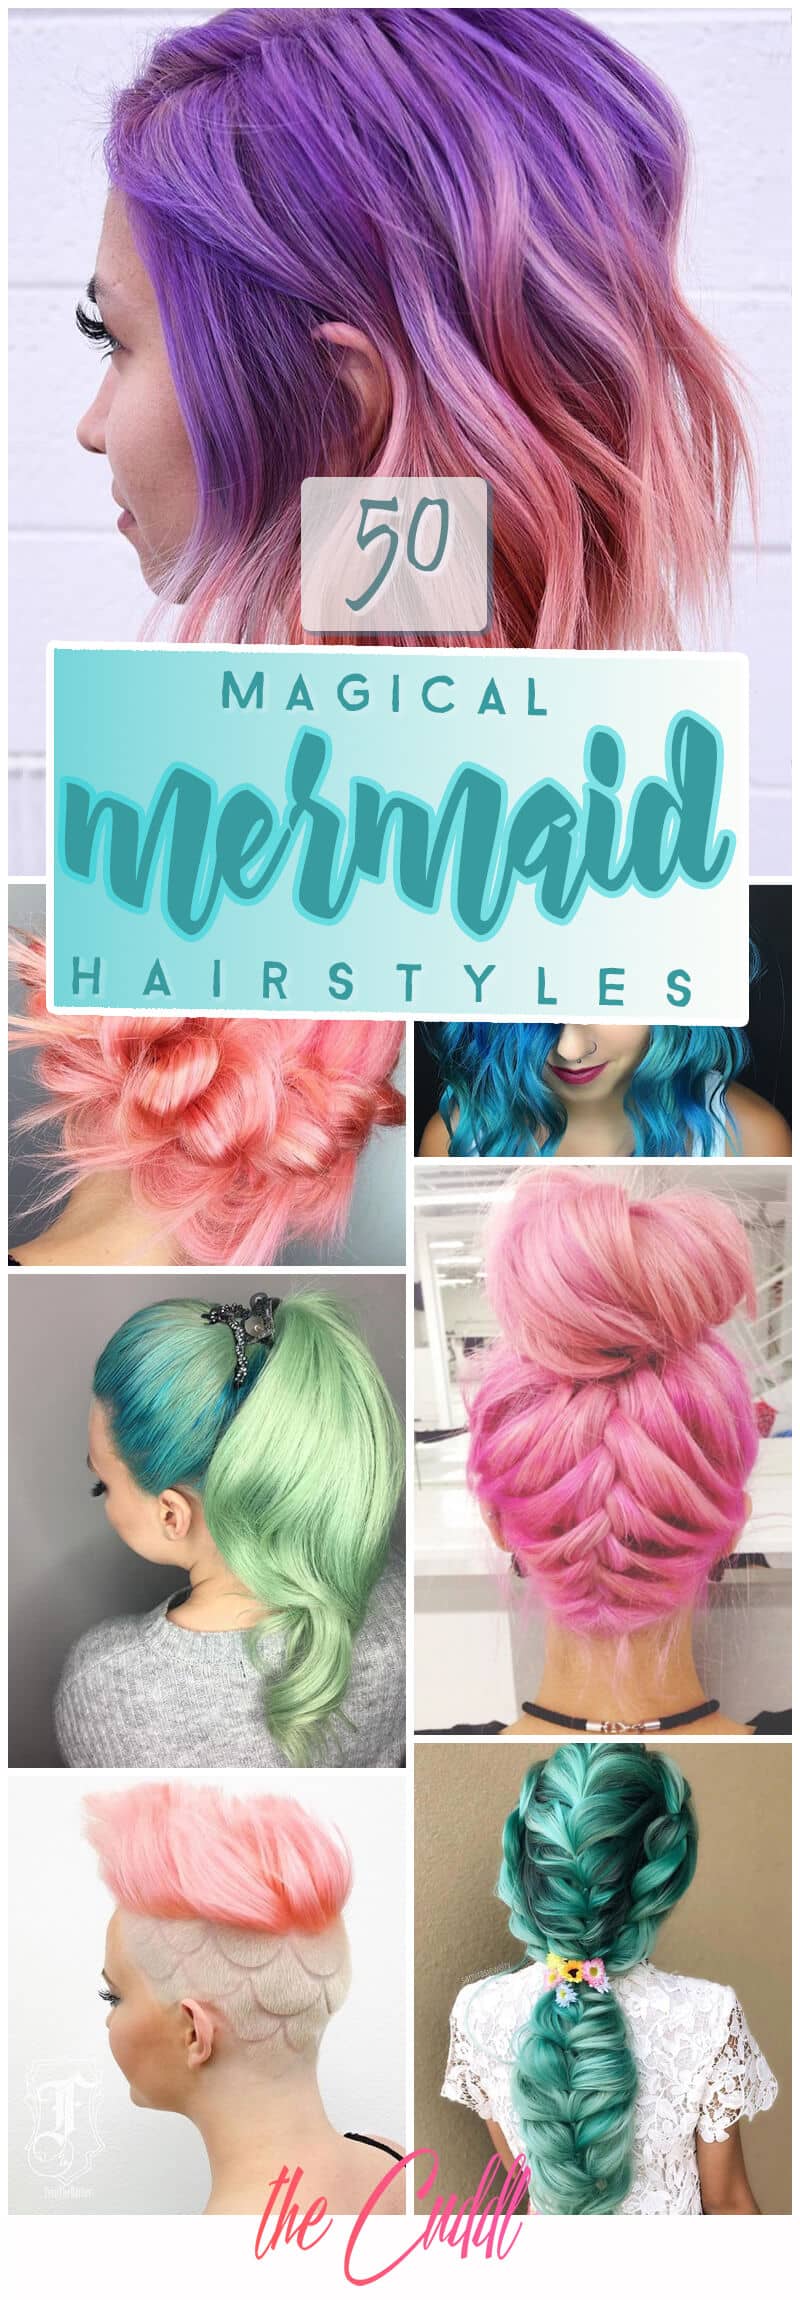 50 Magical Ways to Style Mermaid Hair for Every Hair Type